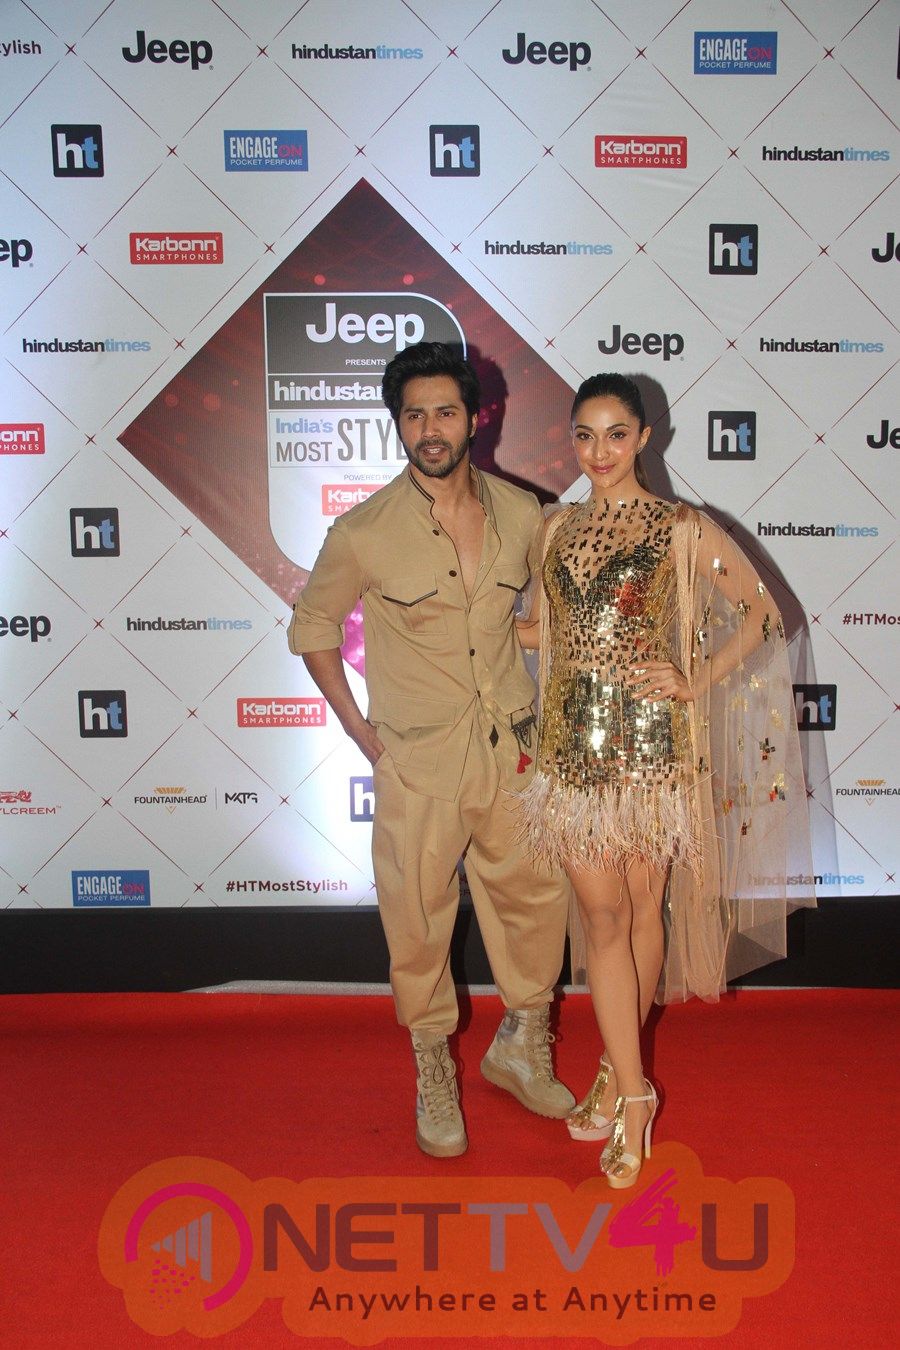 Star Studded Red Carpet Of Ht Most Stylish Awards 2018 Photos Hindi Gallery